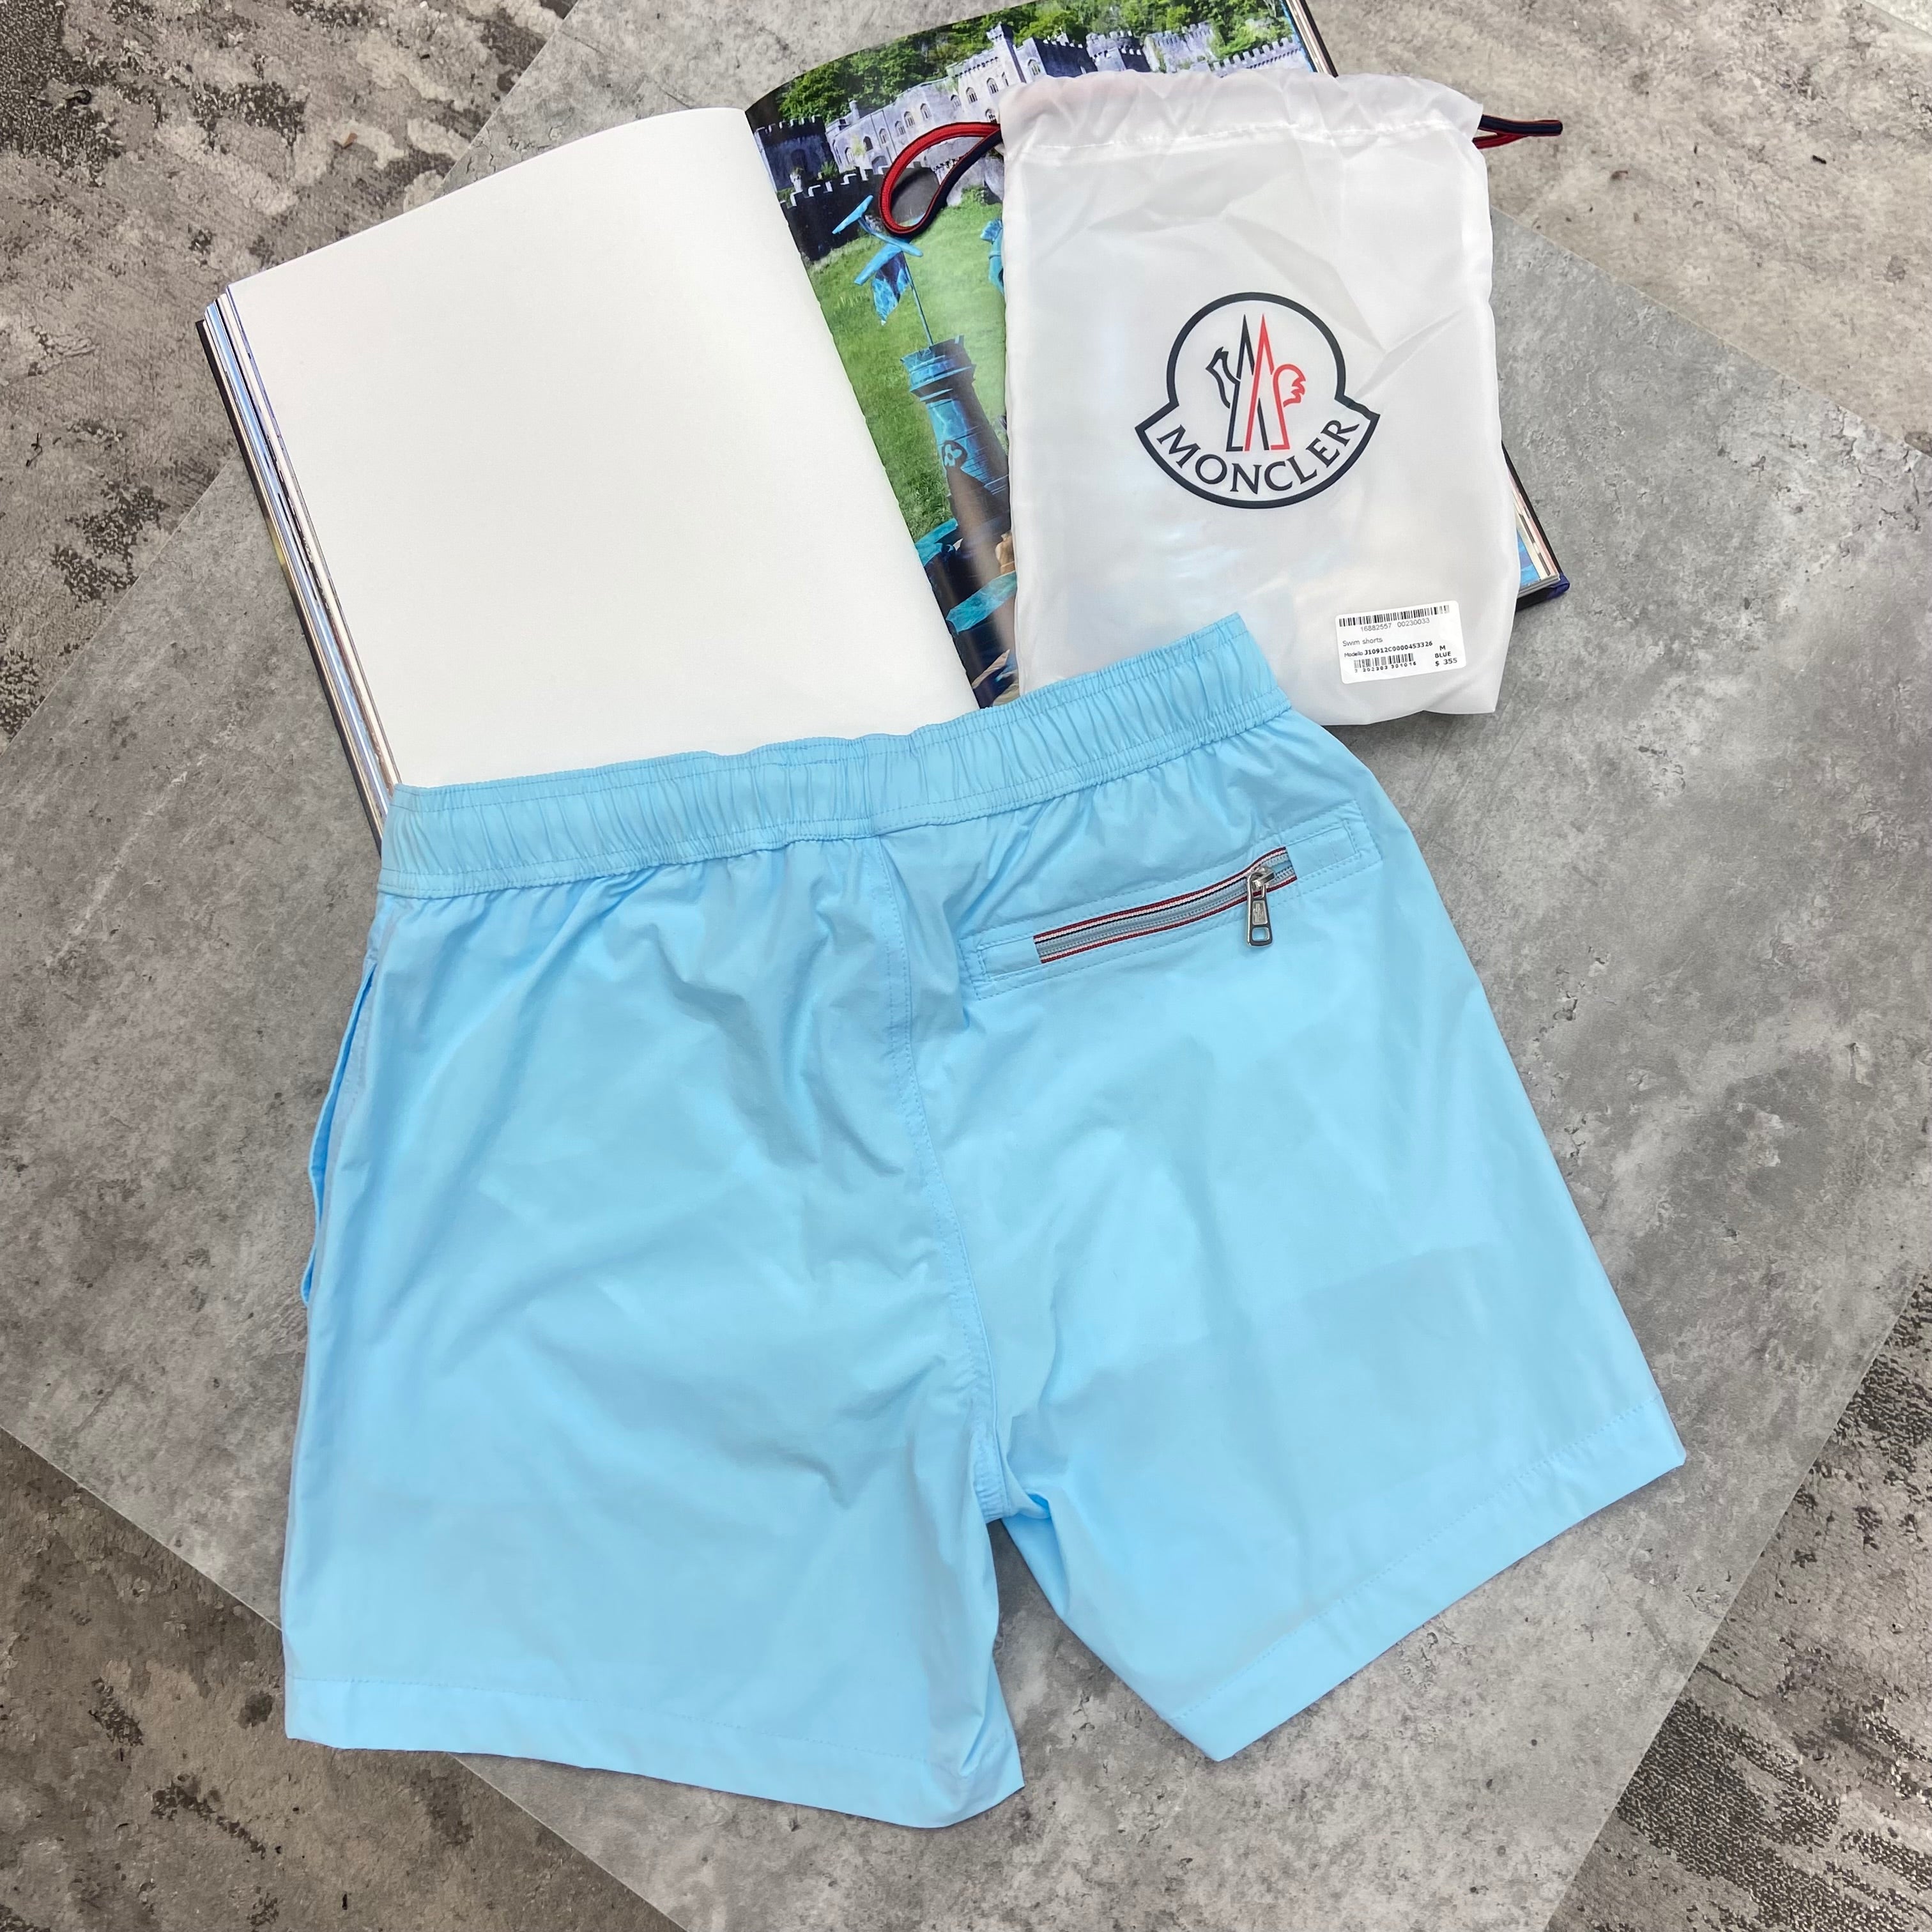 MONCLER - BAGGED SWIMS - SKY BLUE